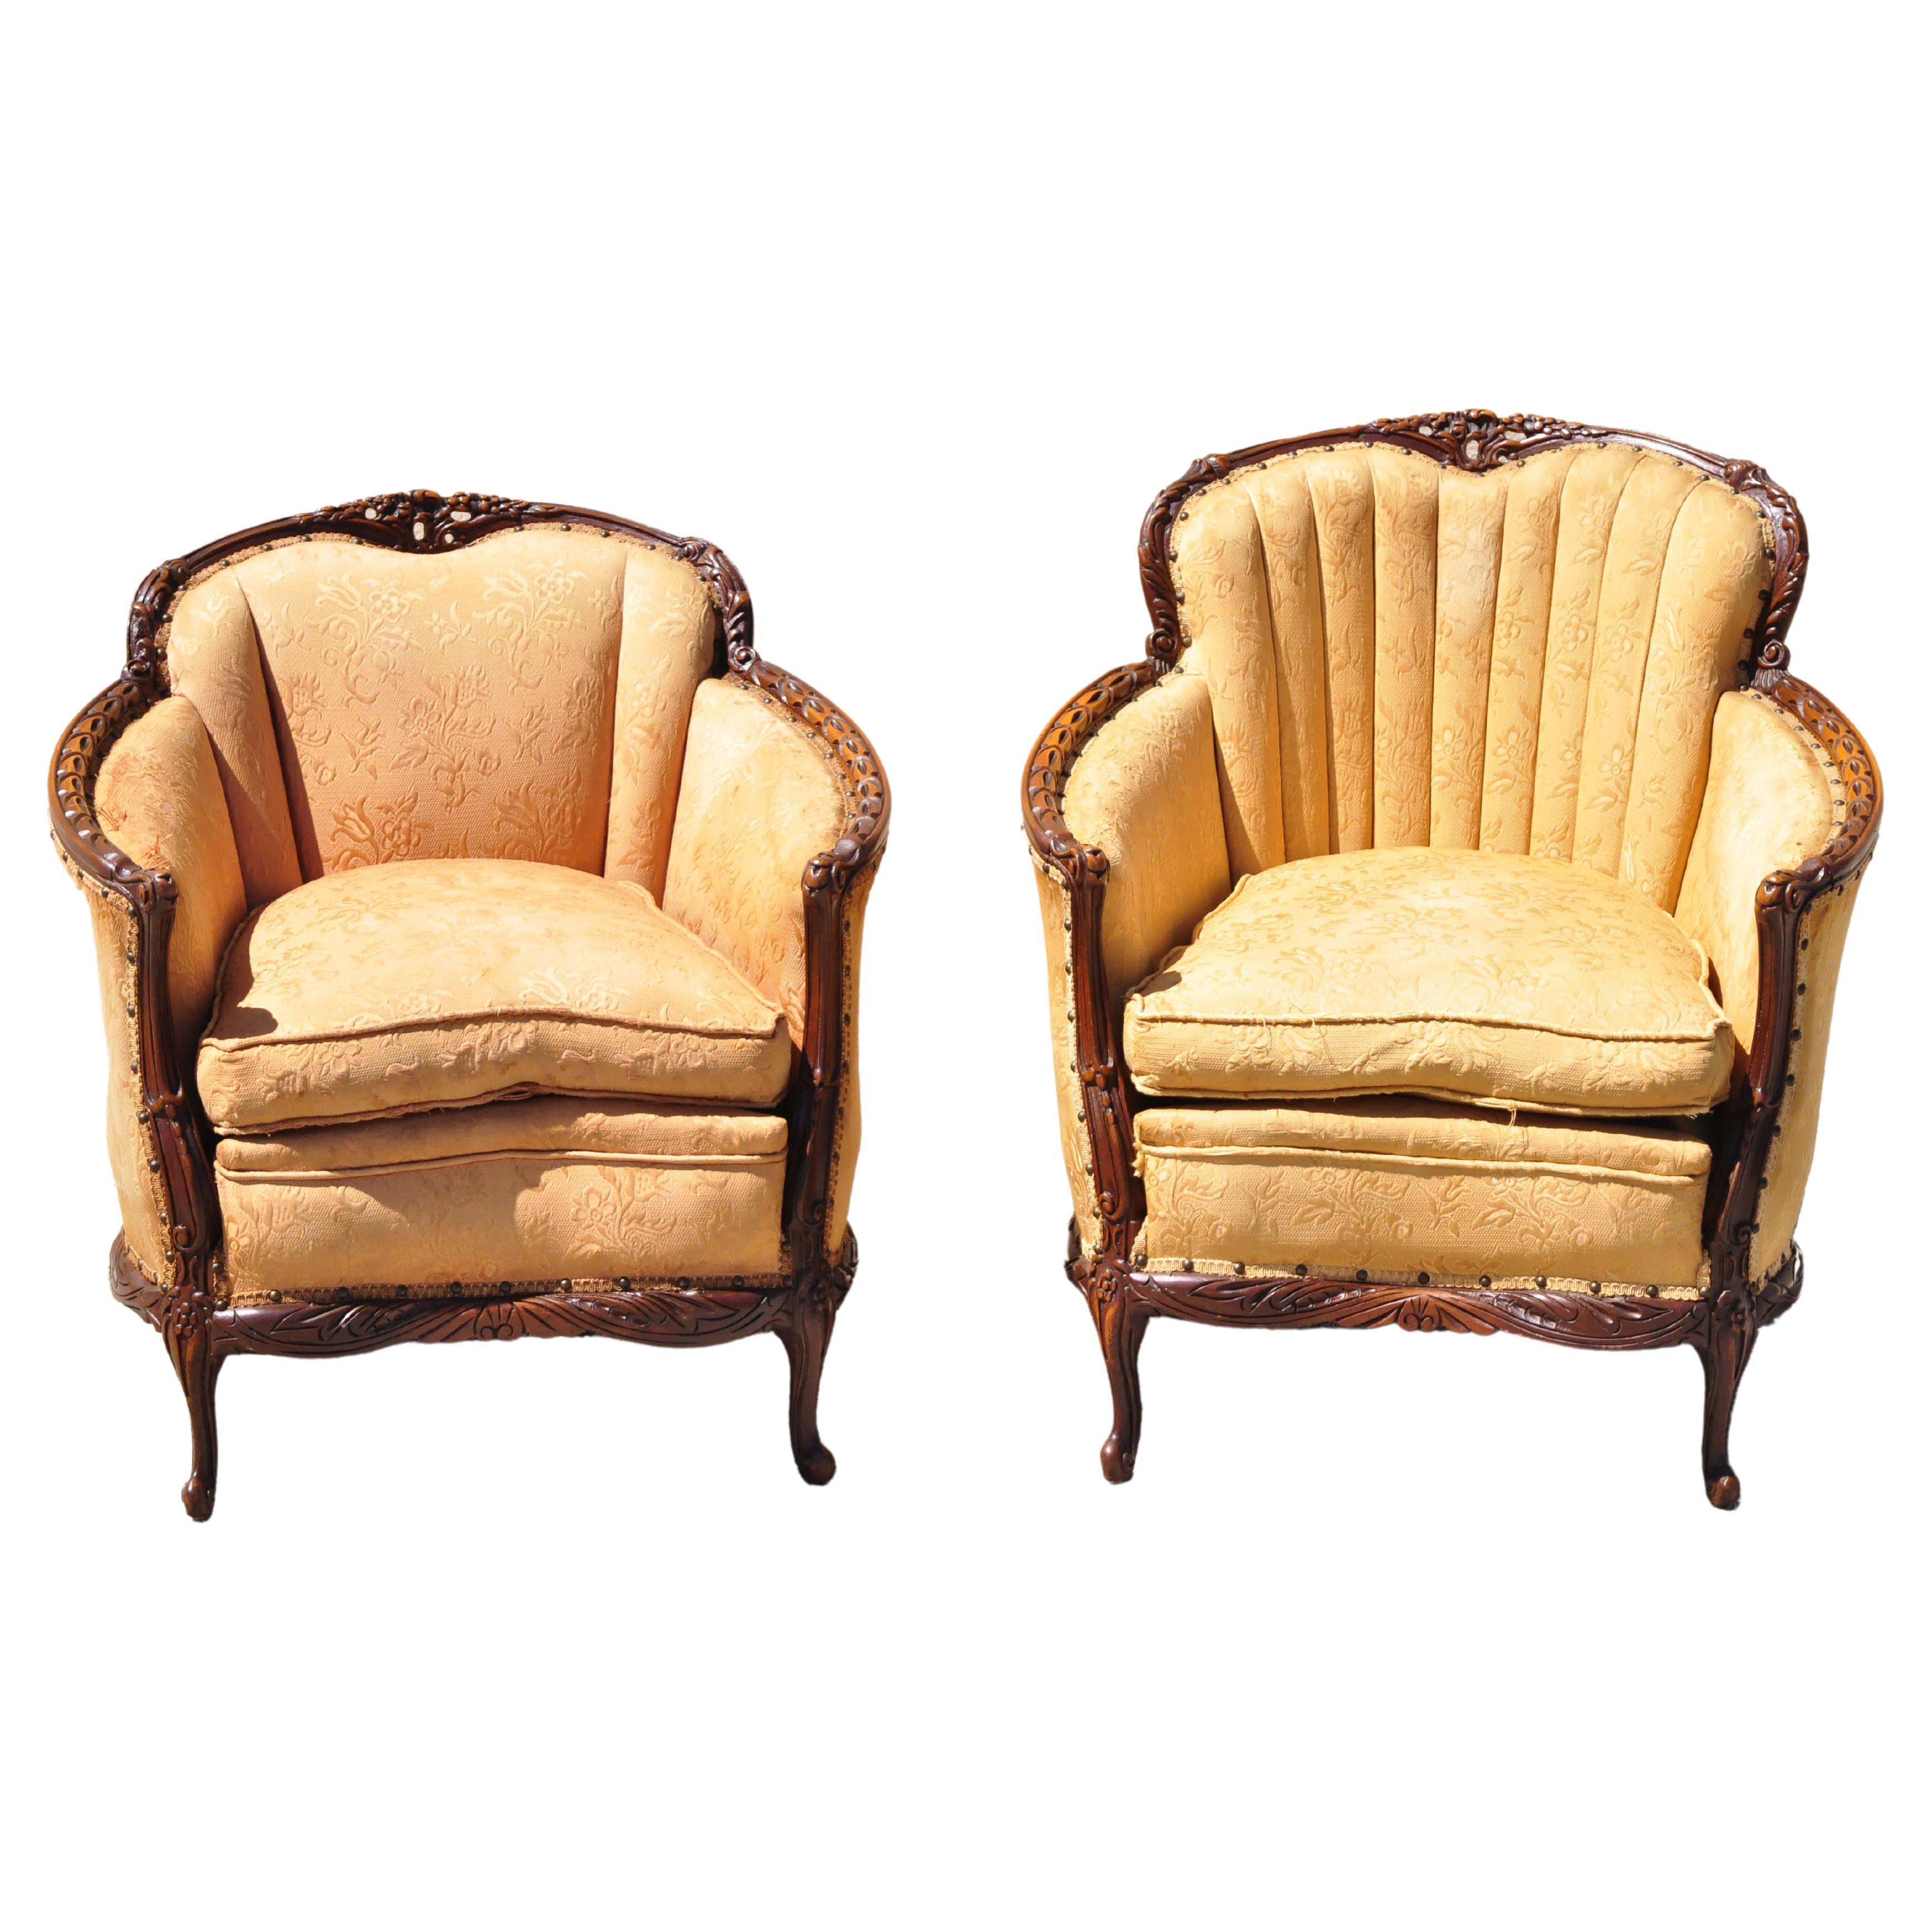 Antique Hollywood Regency French His & Hers Carved Mahogany Club Chairs - a Pair